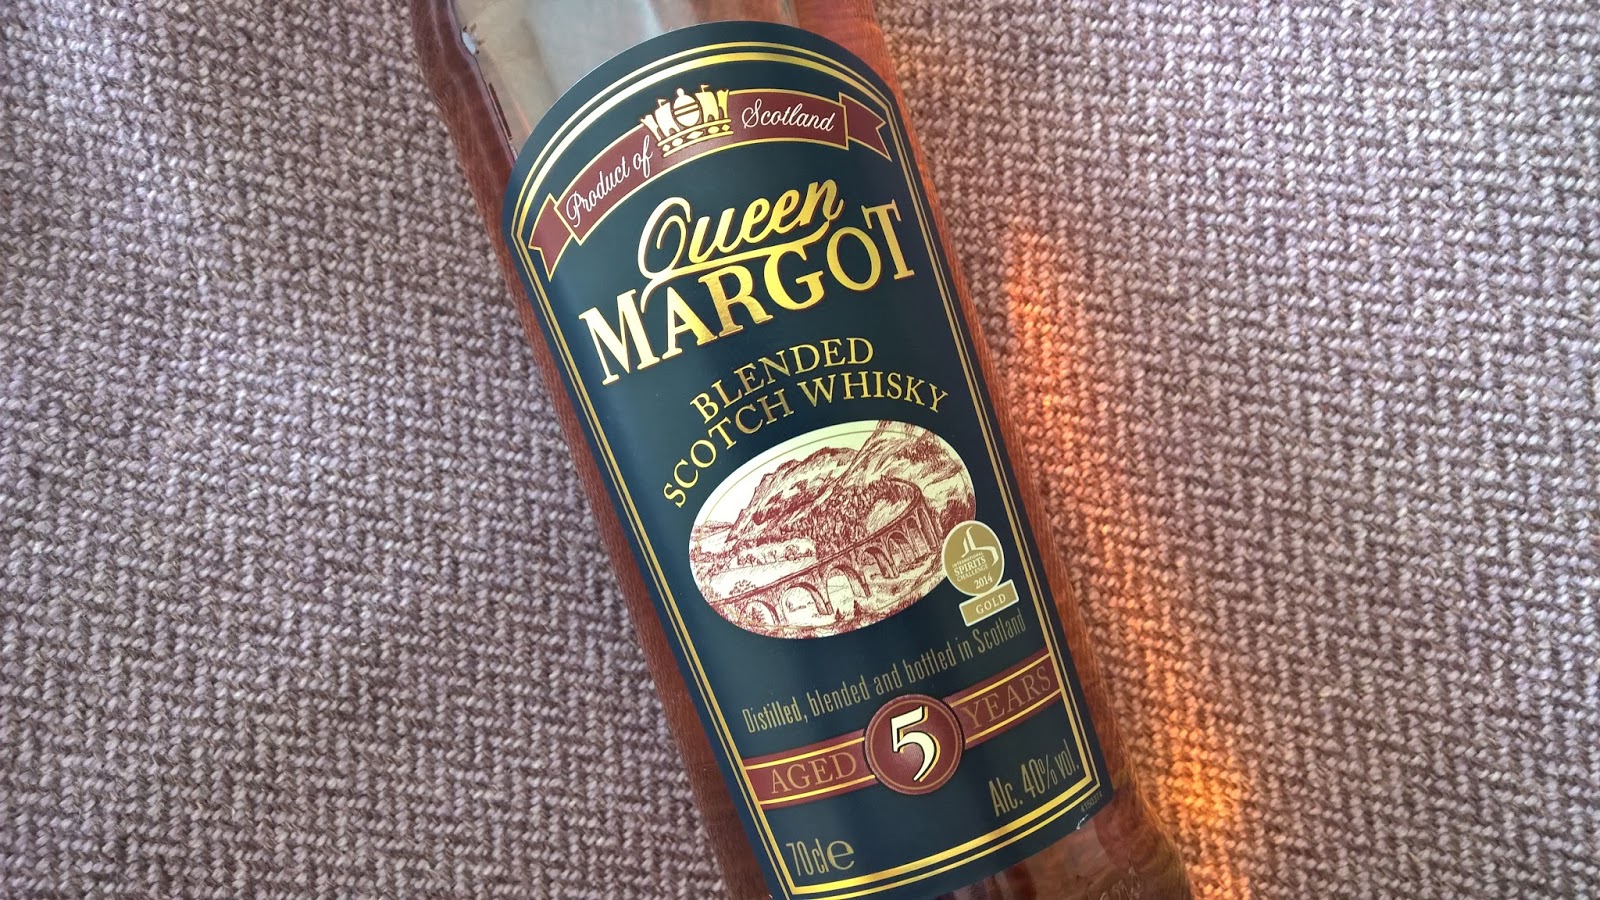 Review: Queen Margot Whisky Blended Scotch